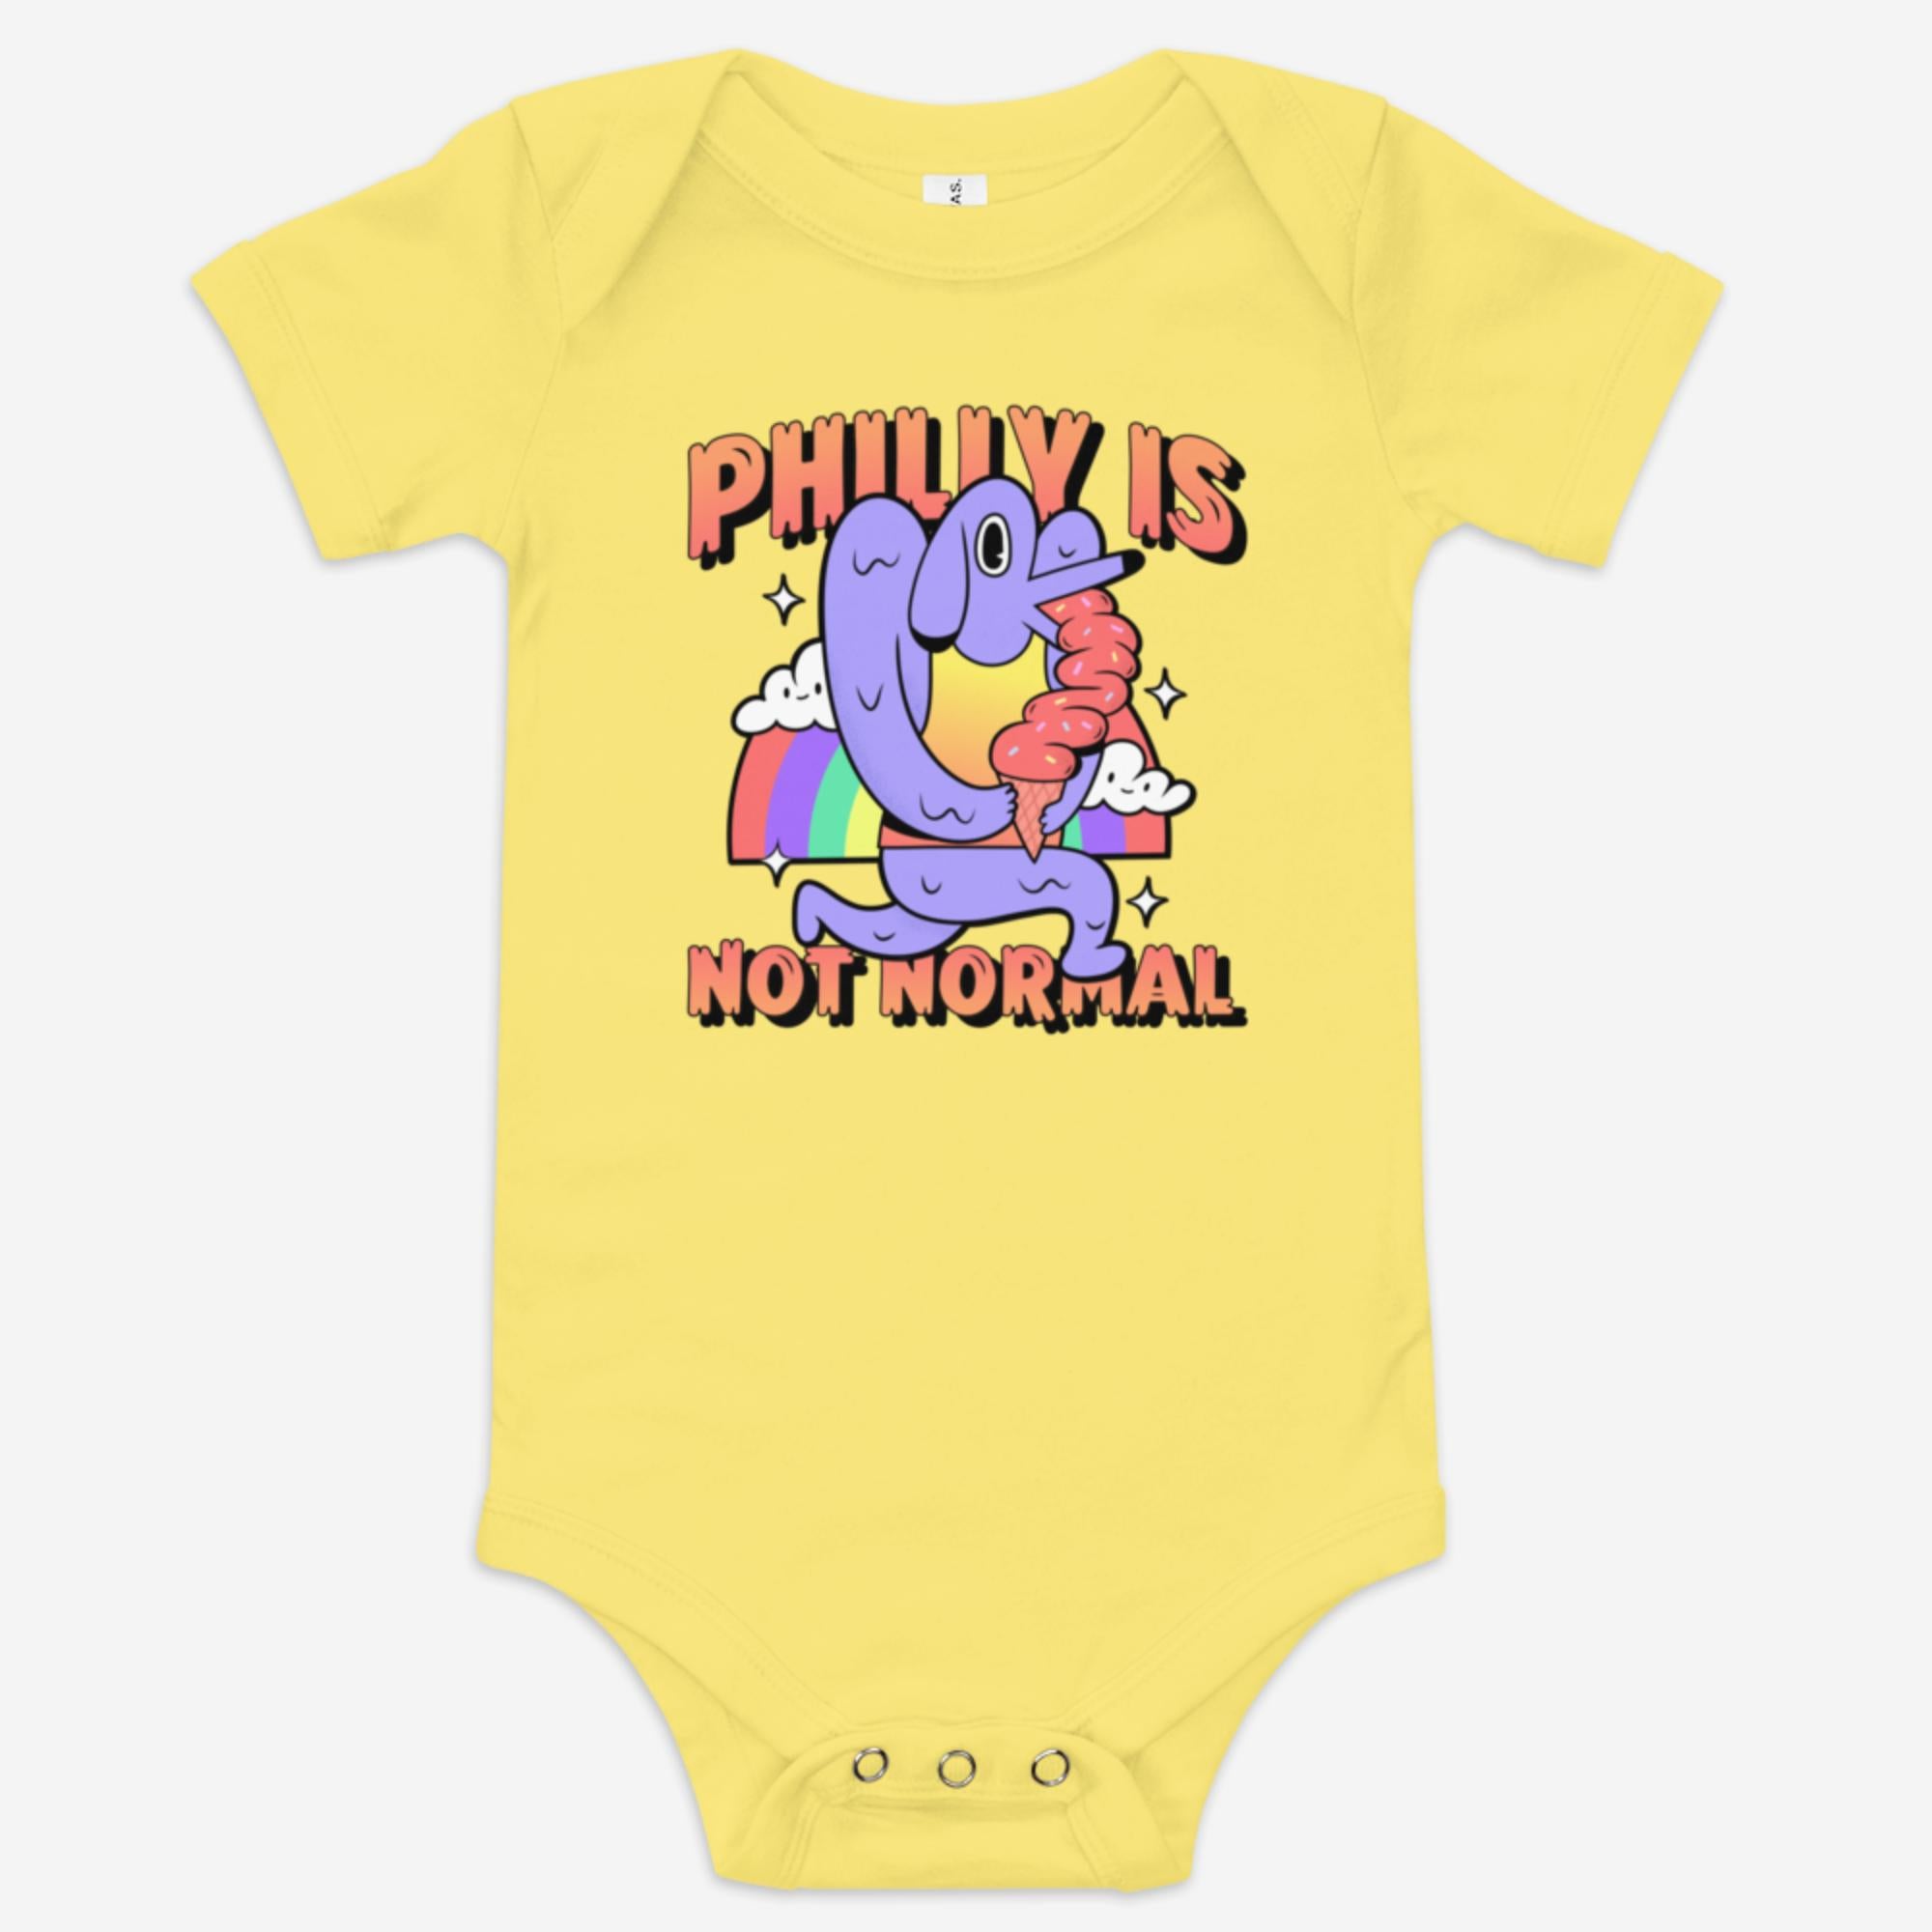 "Philly Is Not Normal" Baby Onesie